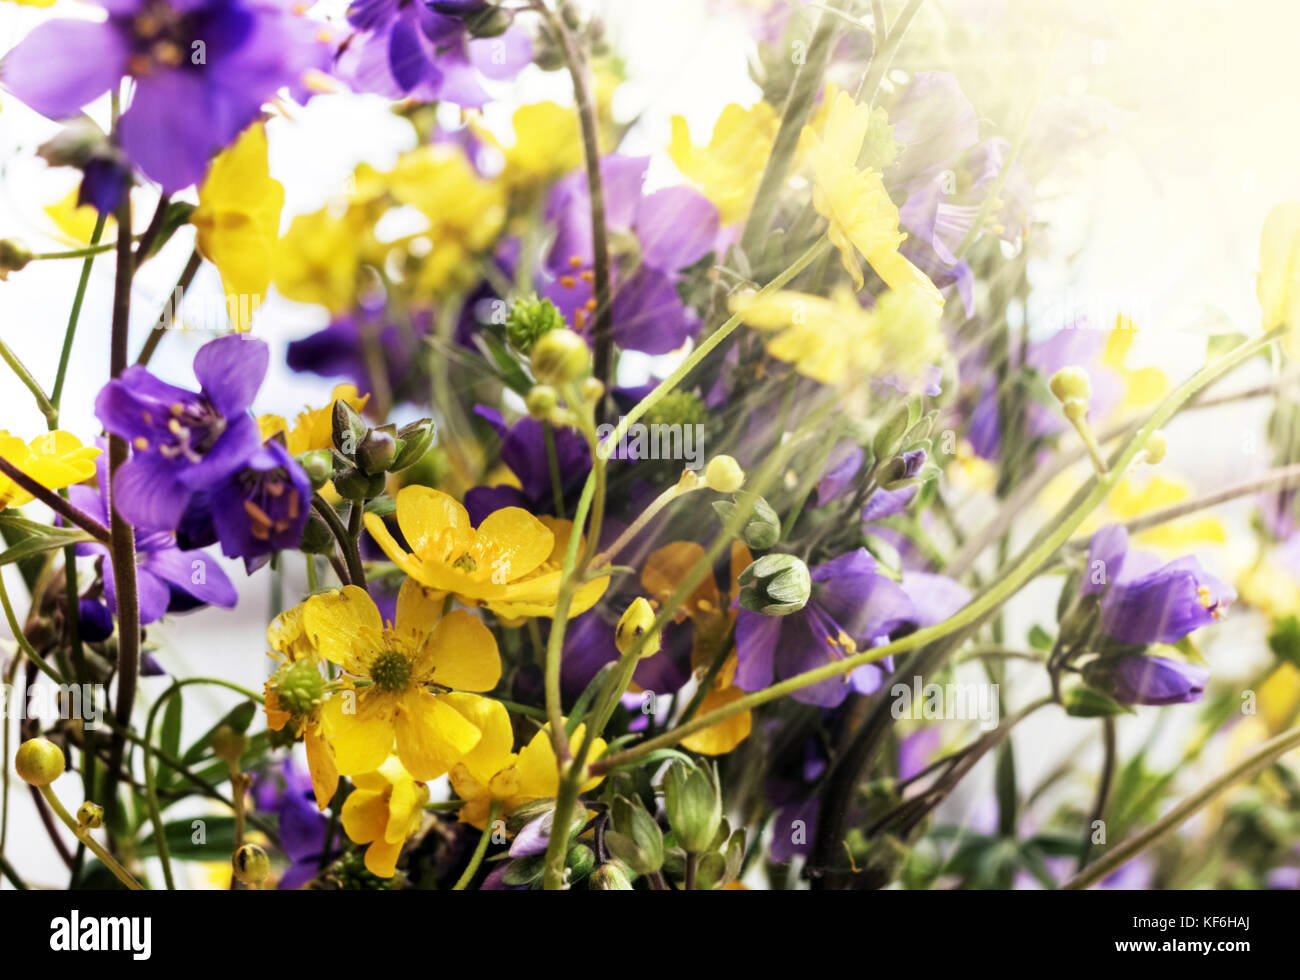 Yellow and purple flowers on summer happy day Stock Photo